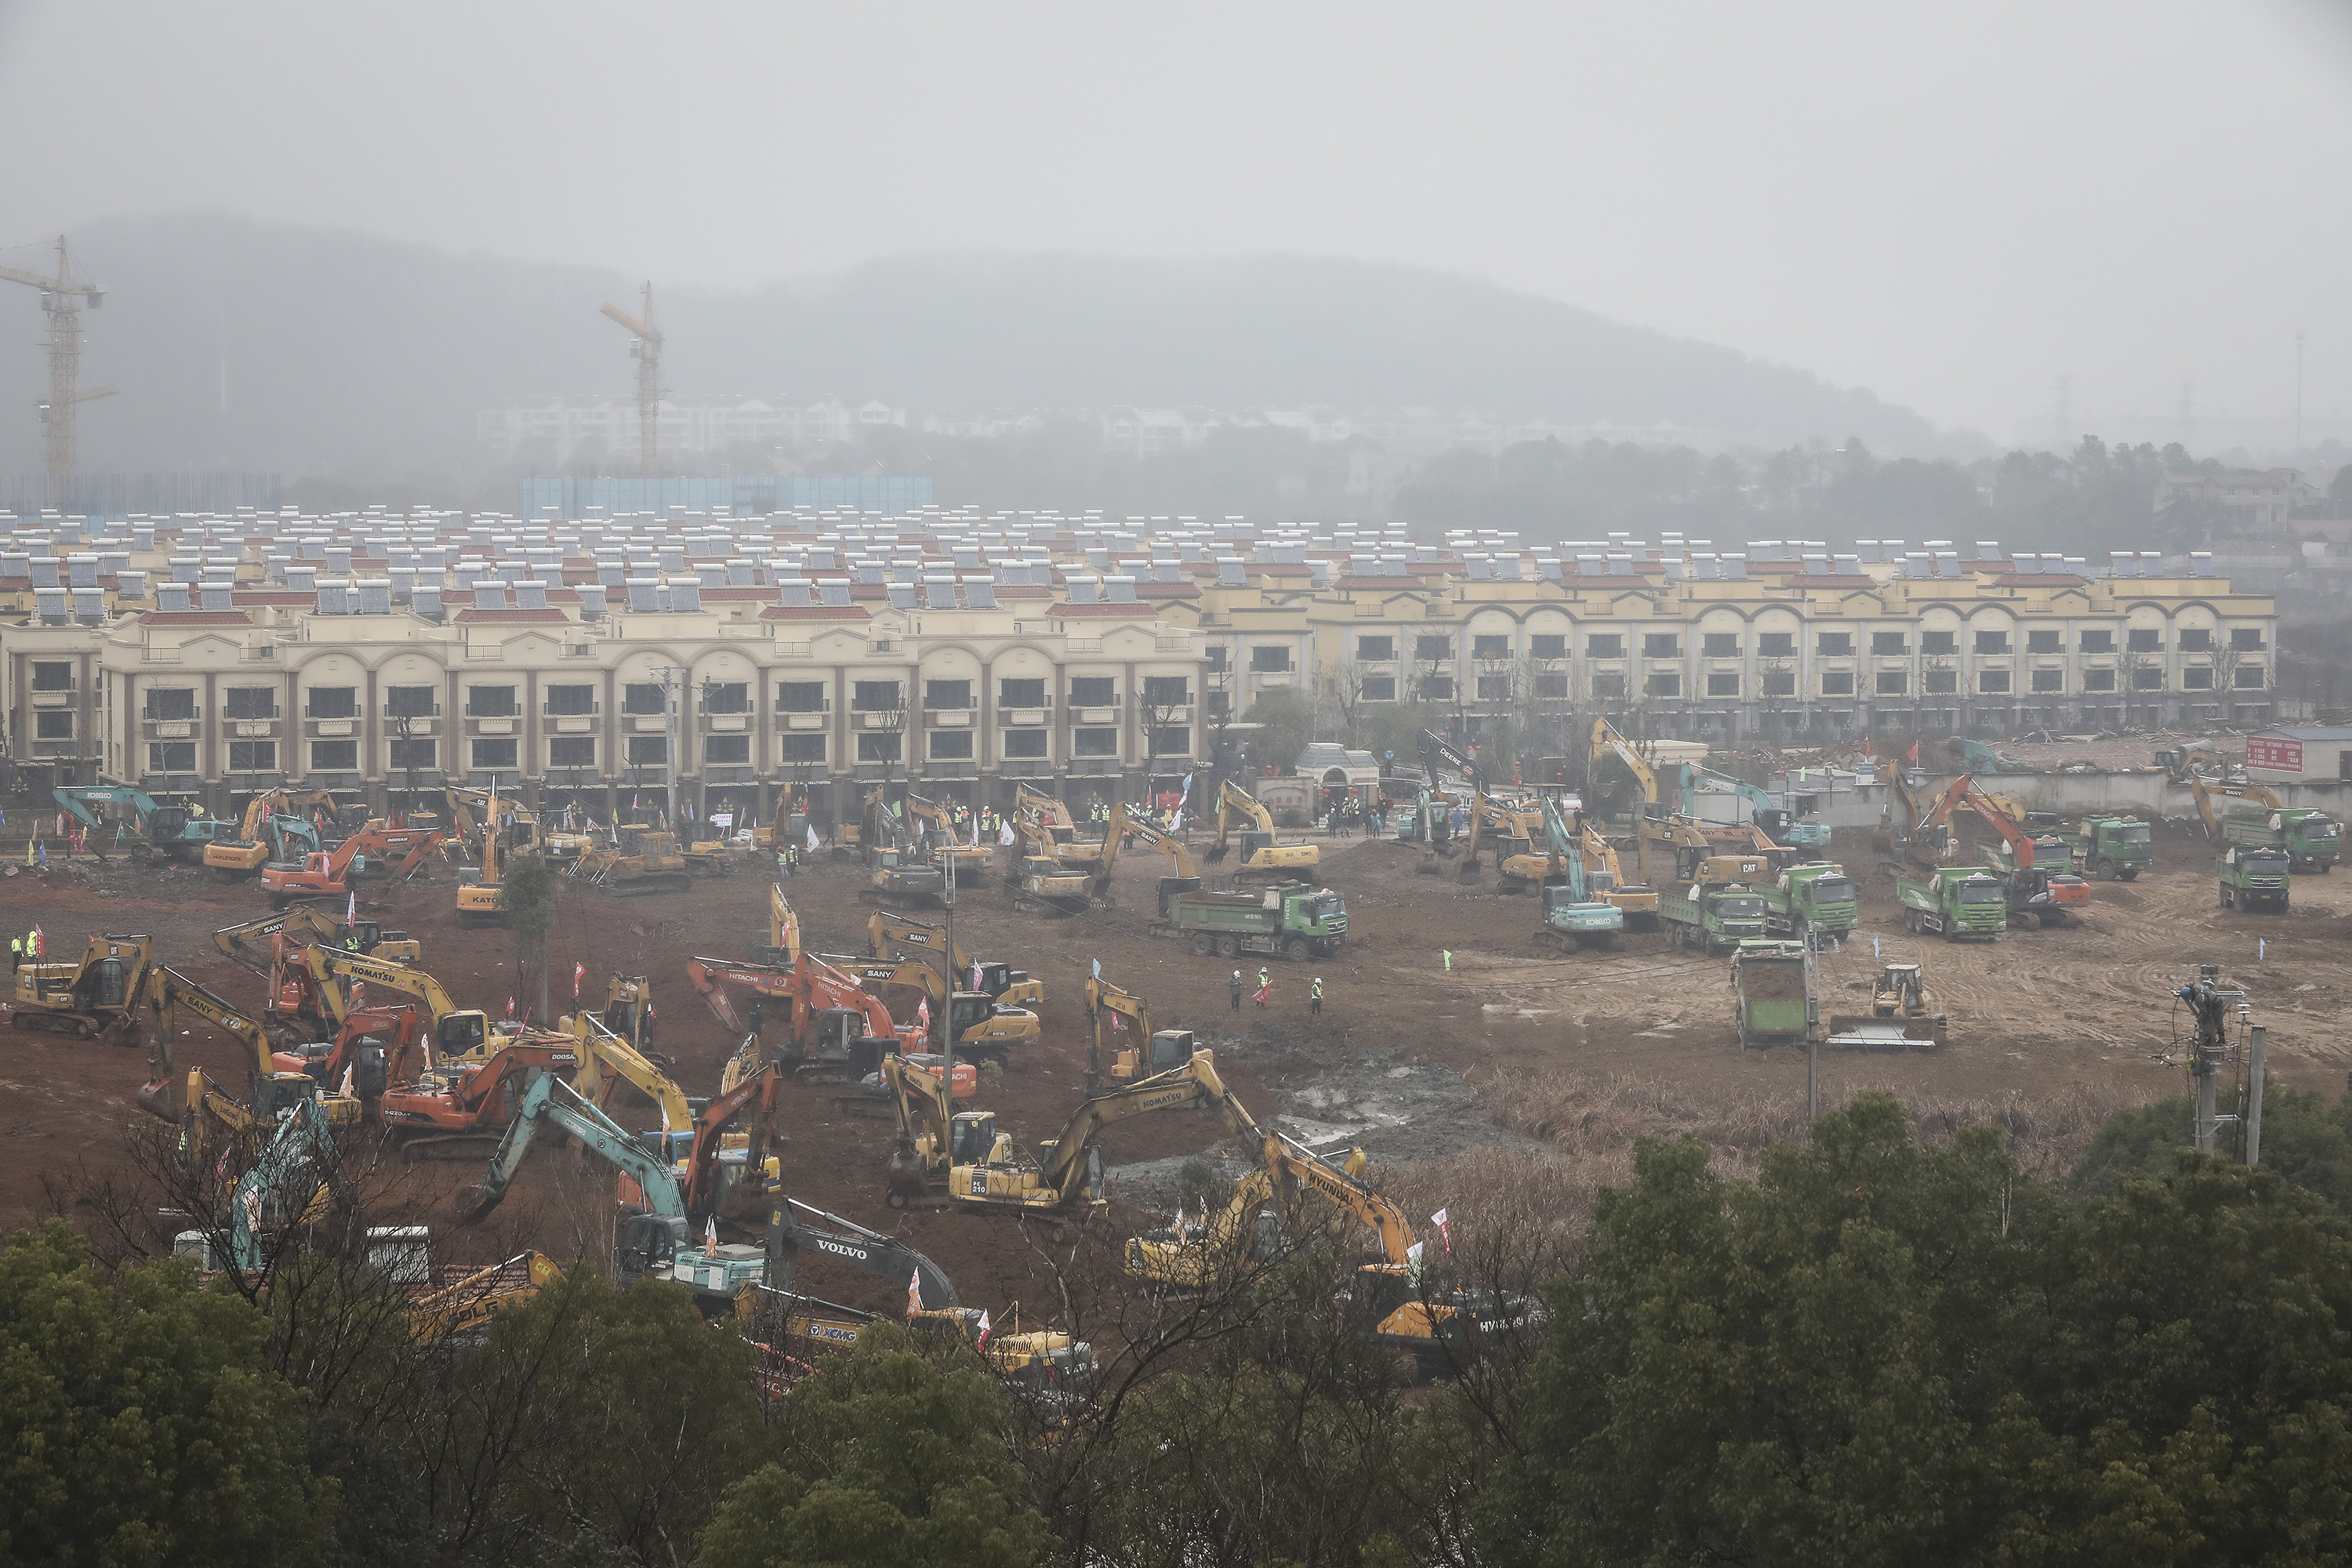 Construction workers drive excavators at the site of a new 1,000-bed hospital being built to accommodate the increasing number of coronavirus patients in this photograph taken on January 24, 2020.